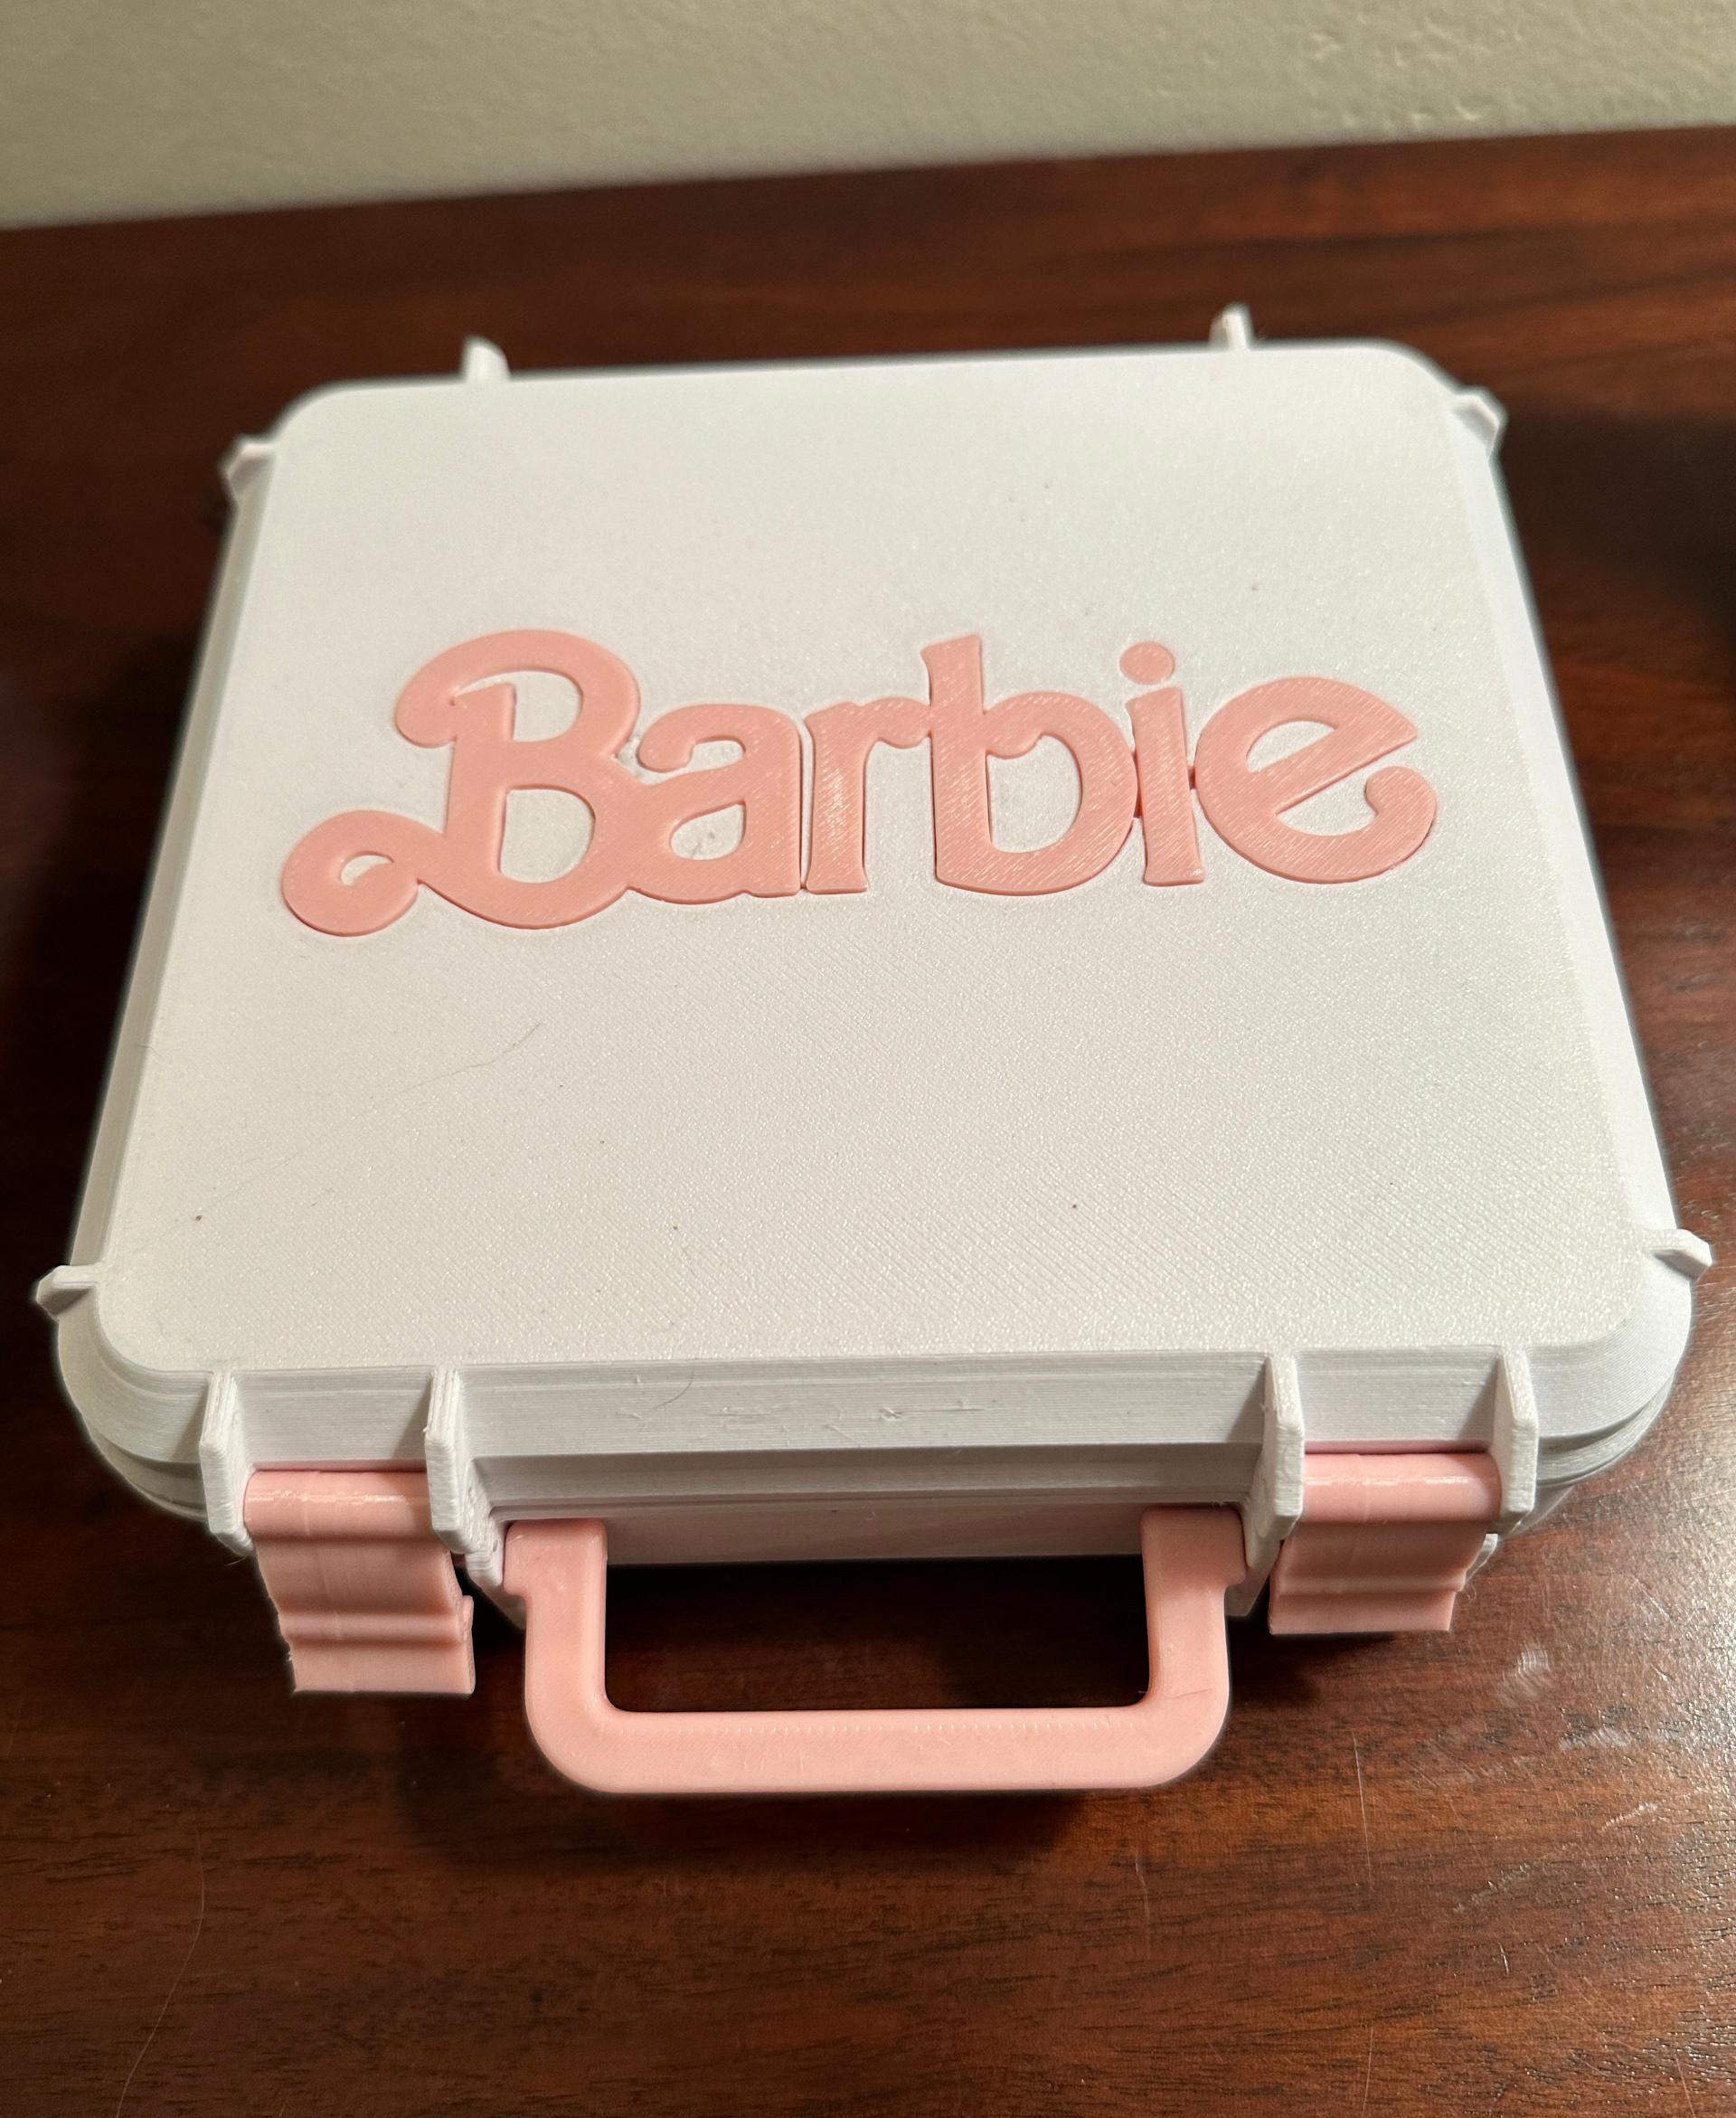  Barbie Box - What a great Design! Thank you, my Barbie obsessed friend will love it. Really well done. I accidentally mounted handle on lower pins but ended up liking it that way as you can hold handle down while lifting up on catches to open the box and the handle is centered when carrying. Great Job!! God Bless, BowieInc Casey - 3d model